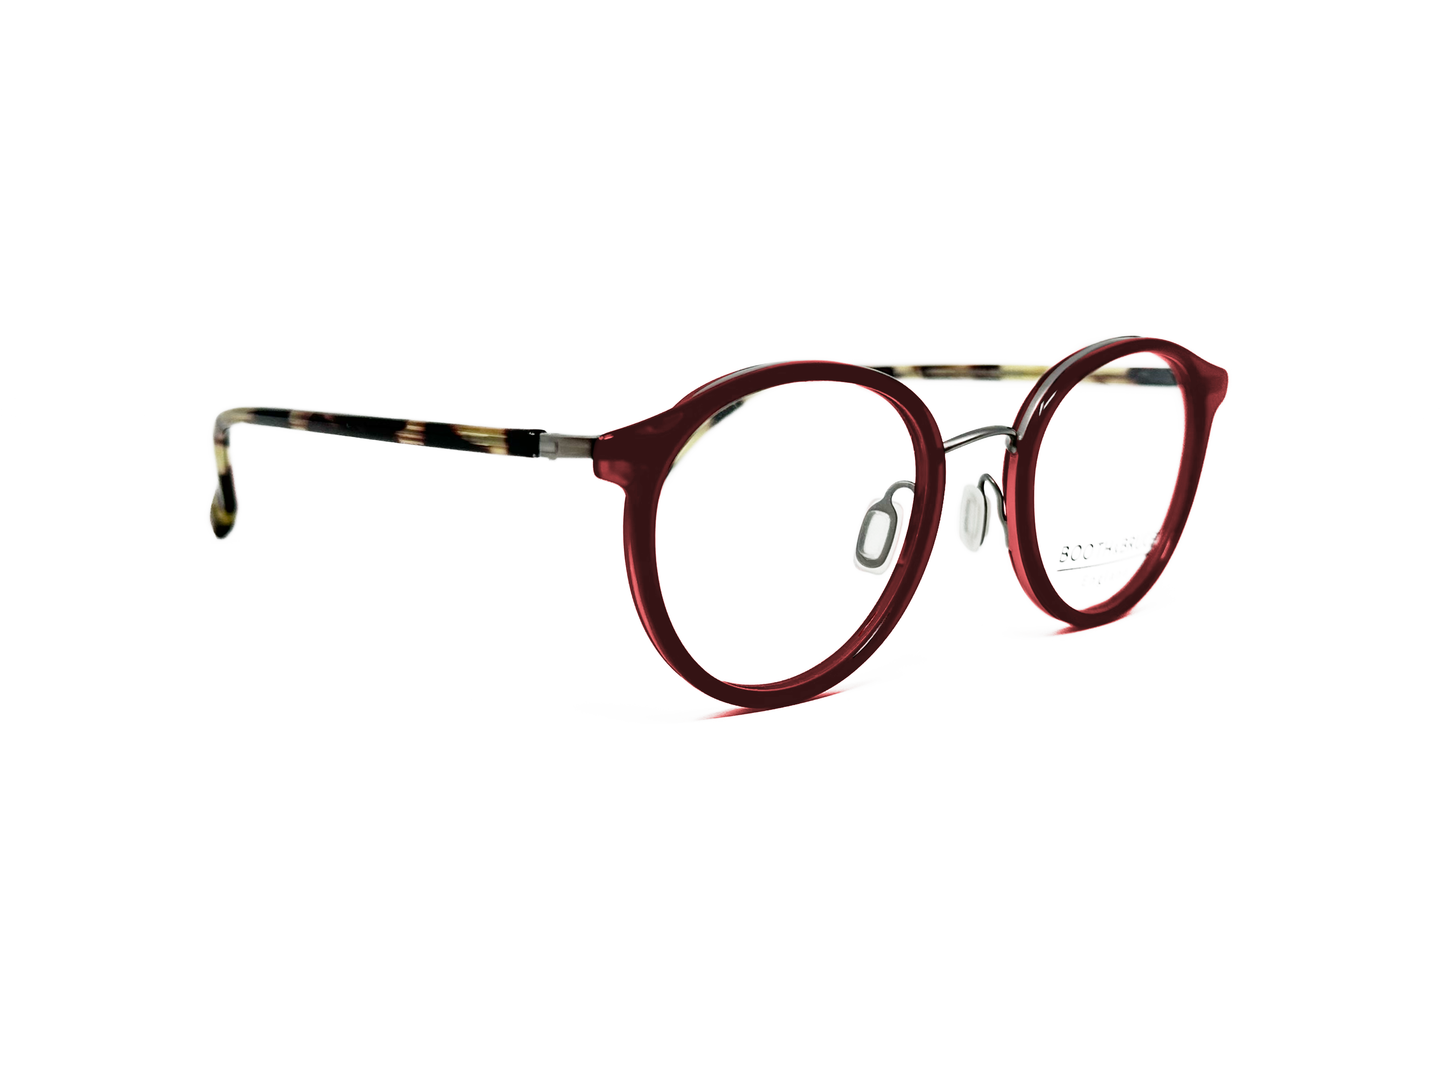 Booth & Bruce round acetate frame with metal bridge. Model: BB2002. Color: Red Hornet - Burgundy with tortoise temples. Side view.